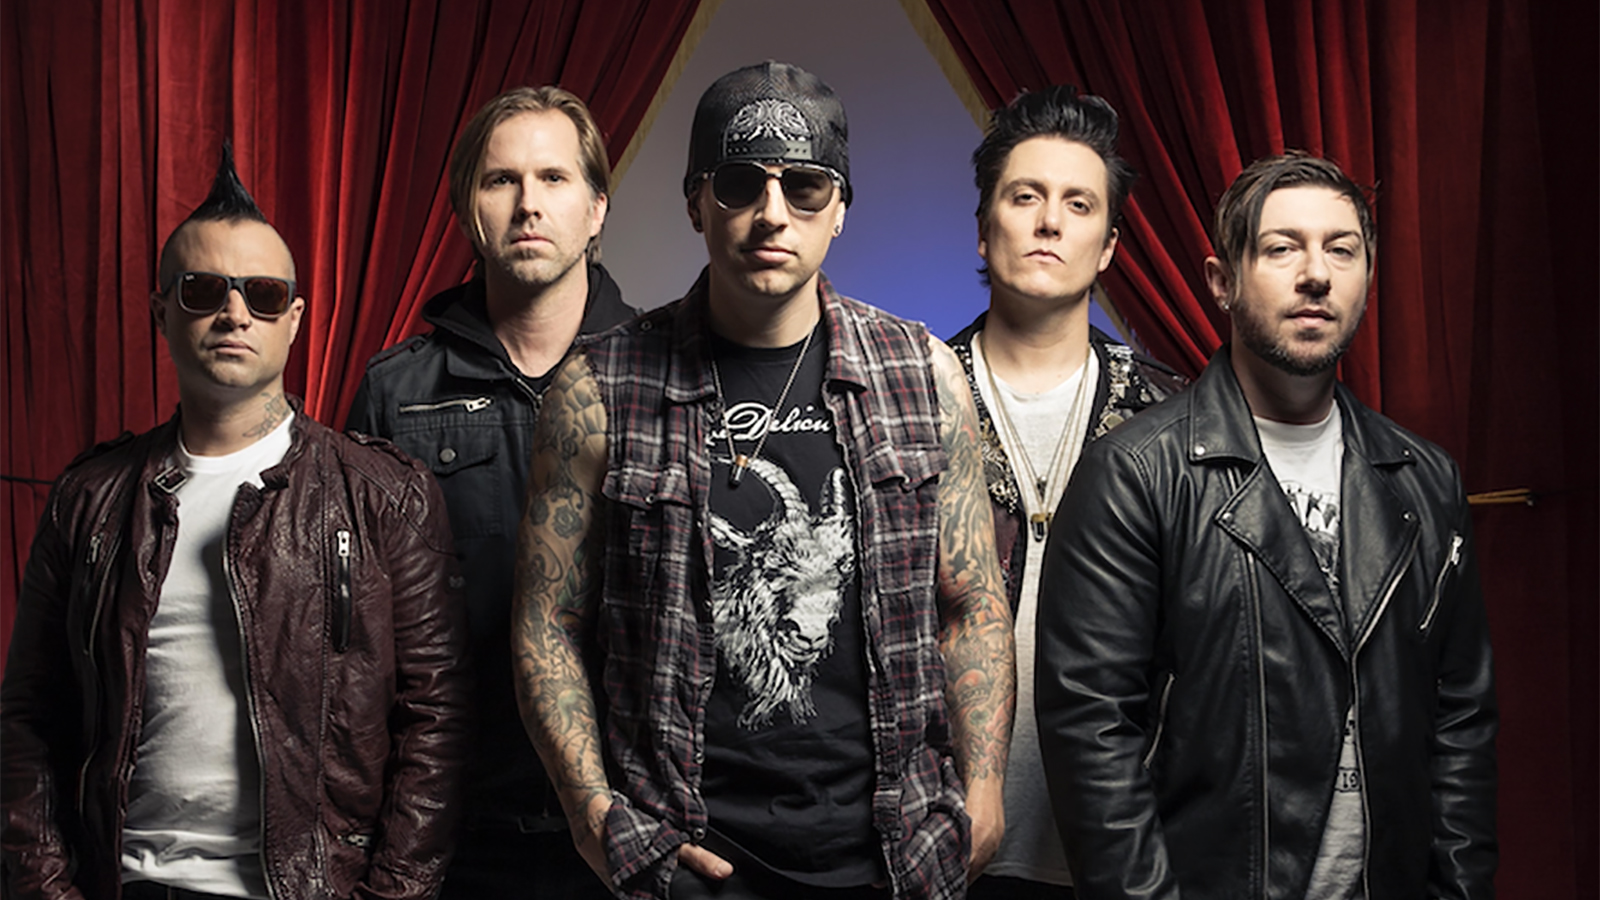 The 20 greatest Avenged Sevenfold songs – ranked